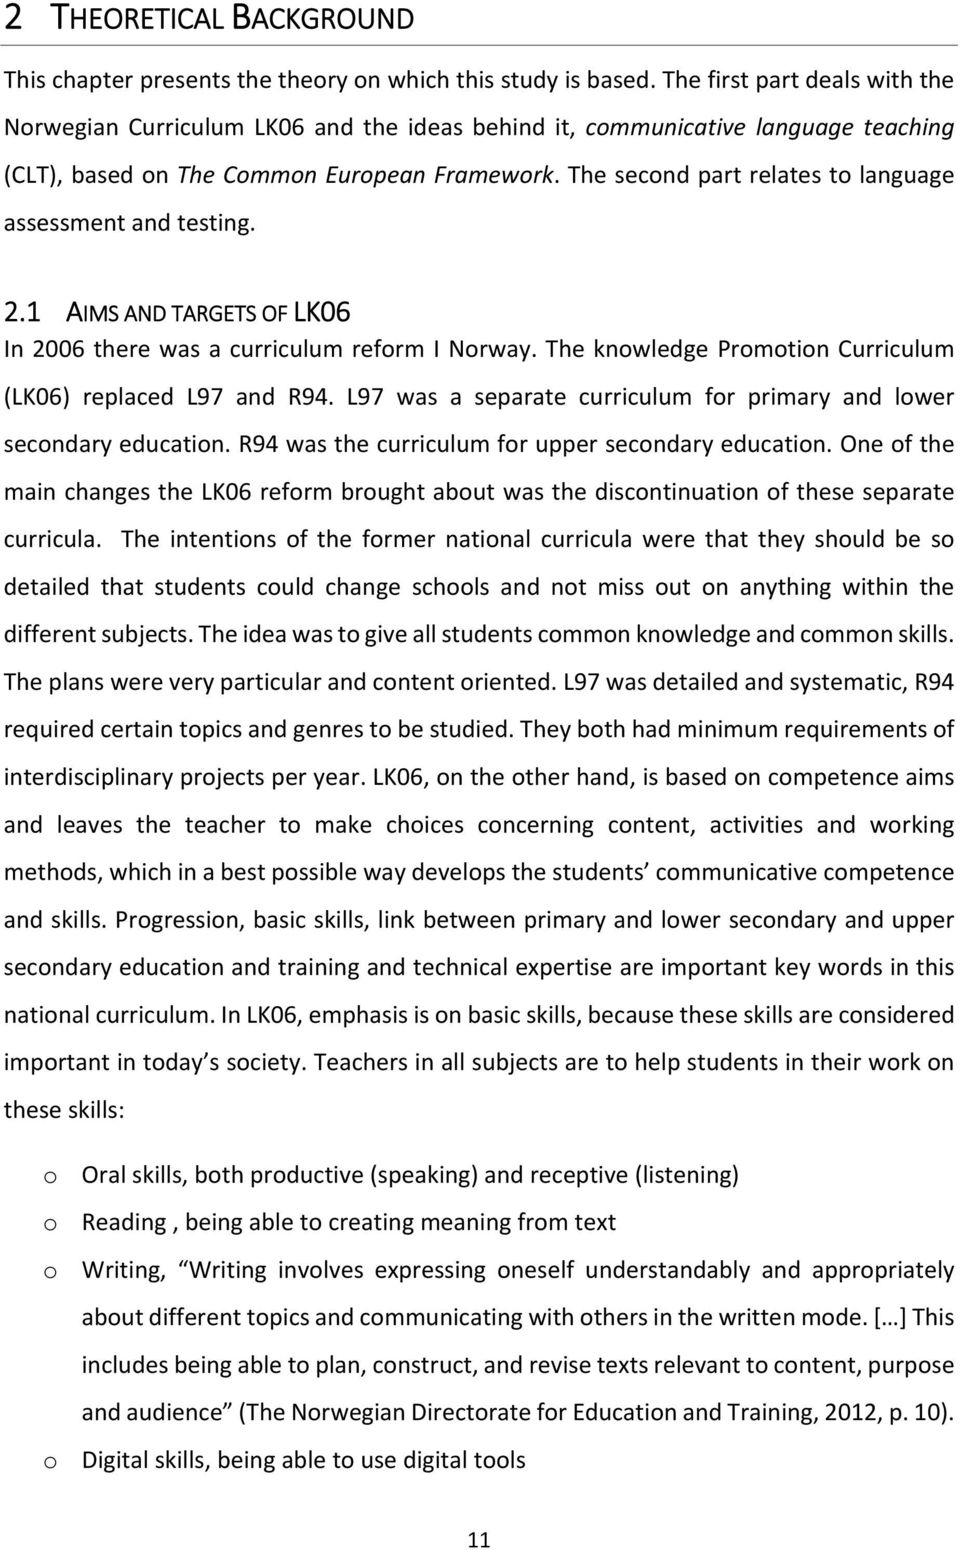 The second part relates to language assessment and testing. 2.1 AIMS AND TARGETS OF LK06 In 2006 there was a curriculum reform I Norway. The knowledge Promotion Curriculum (LK06) replaced L97 and R94.